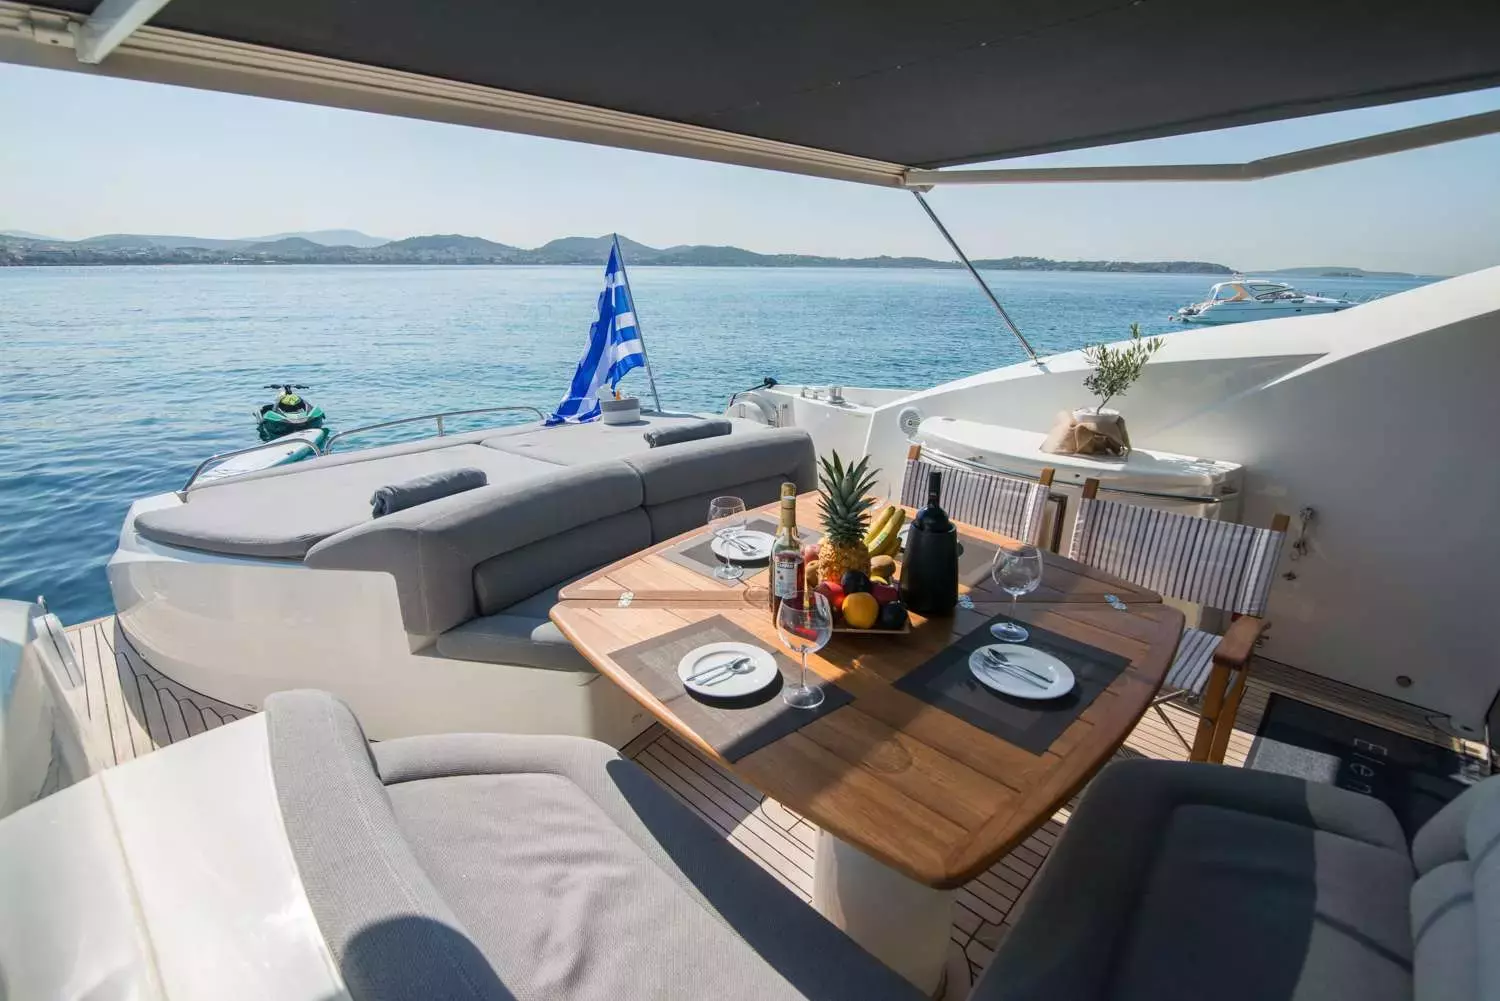 Elentari by Sunseeker - Top rates for a Charter of a private Motor Yacht in Greece